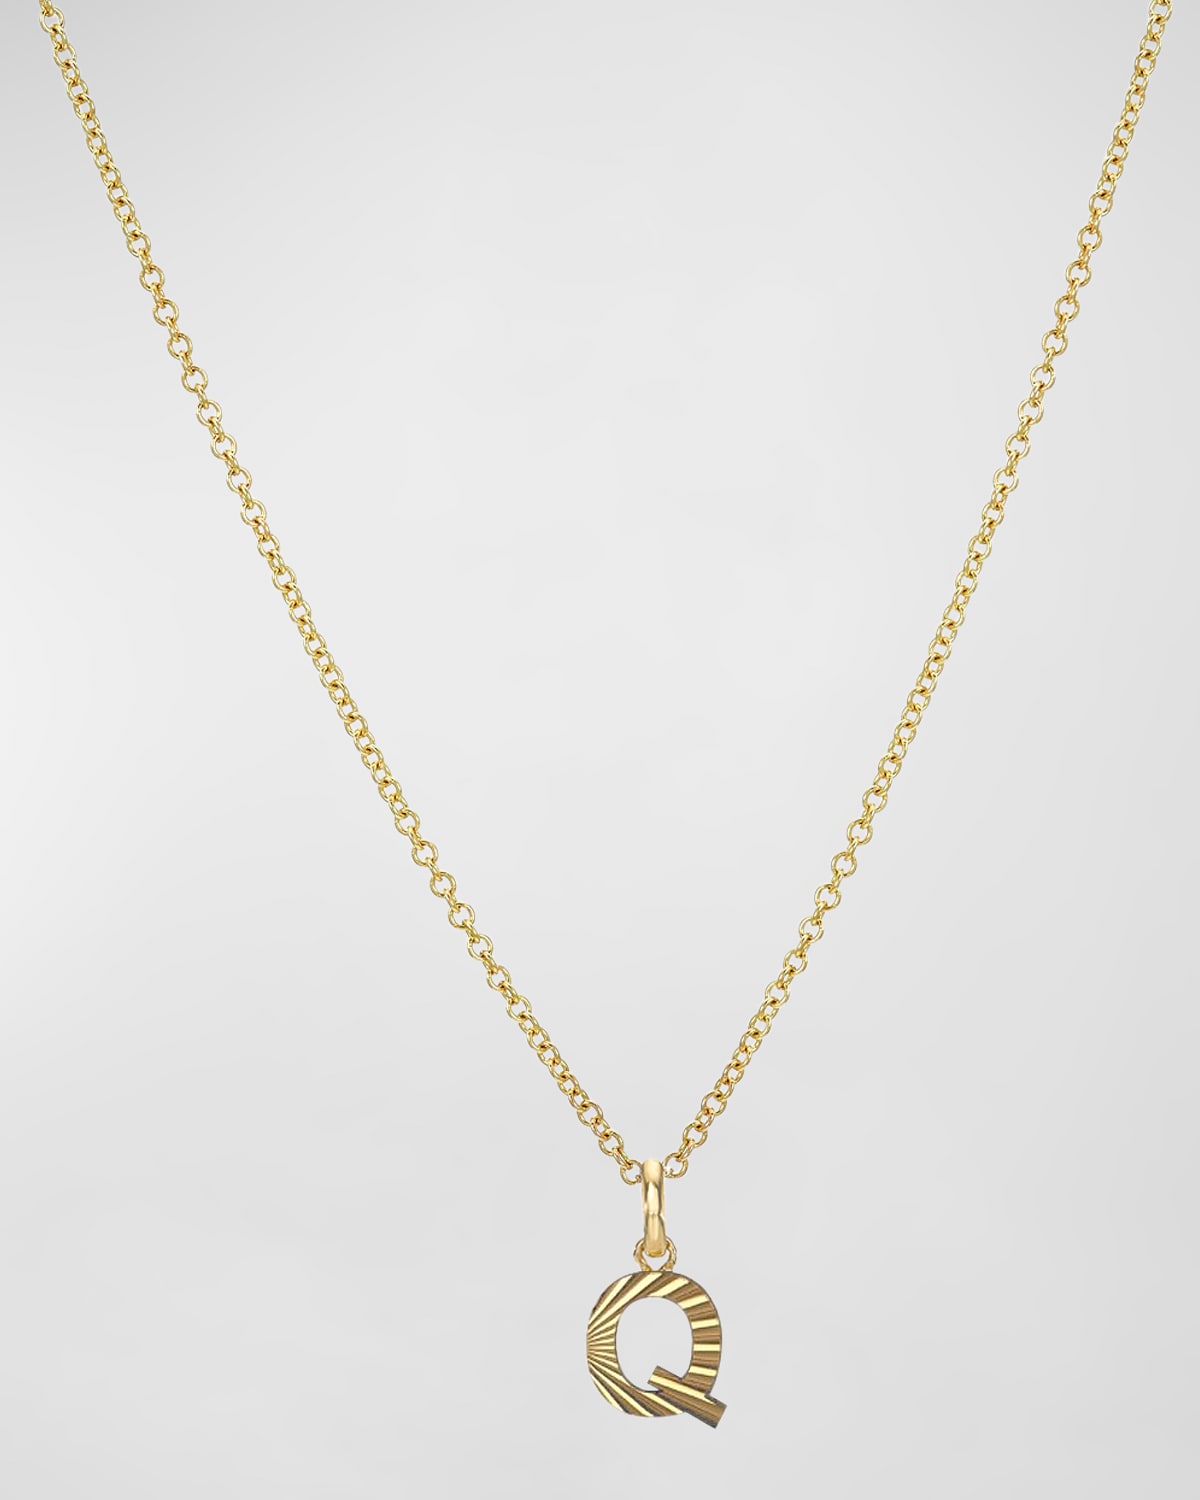 Zoe Lev Jewelry 14k Gold Initial Pendant Necklace In Q